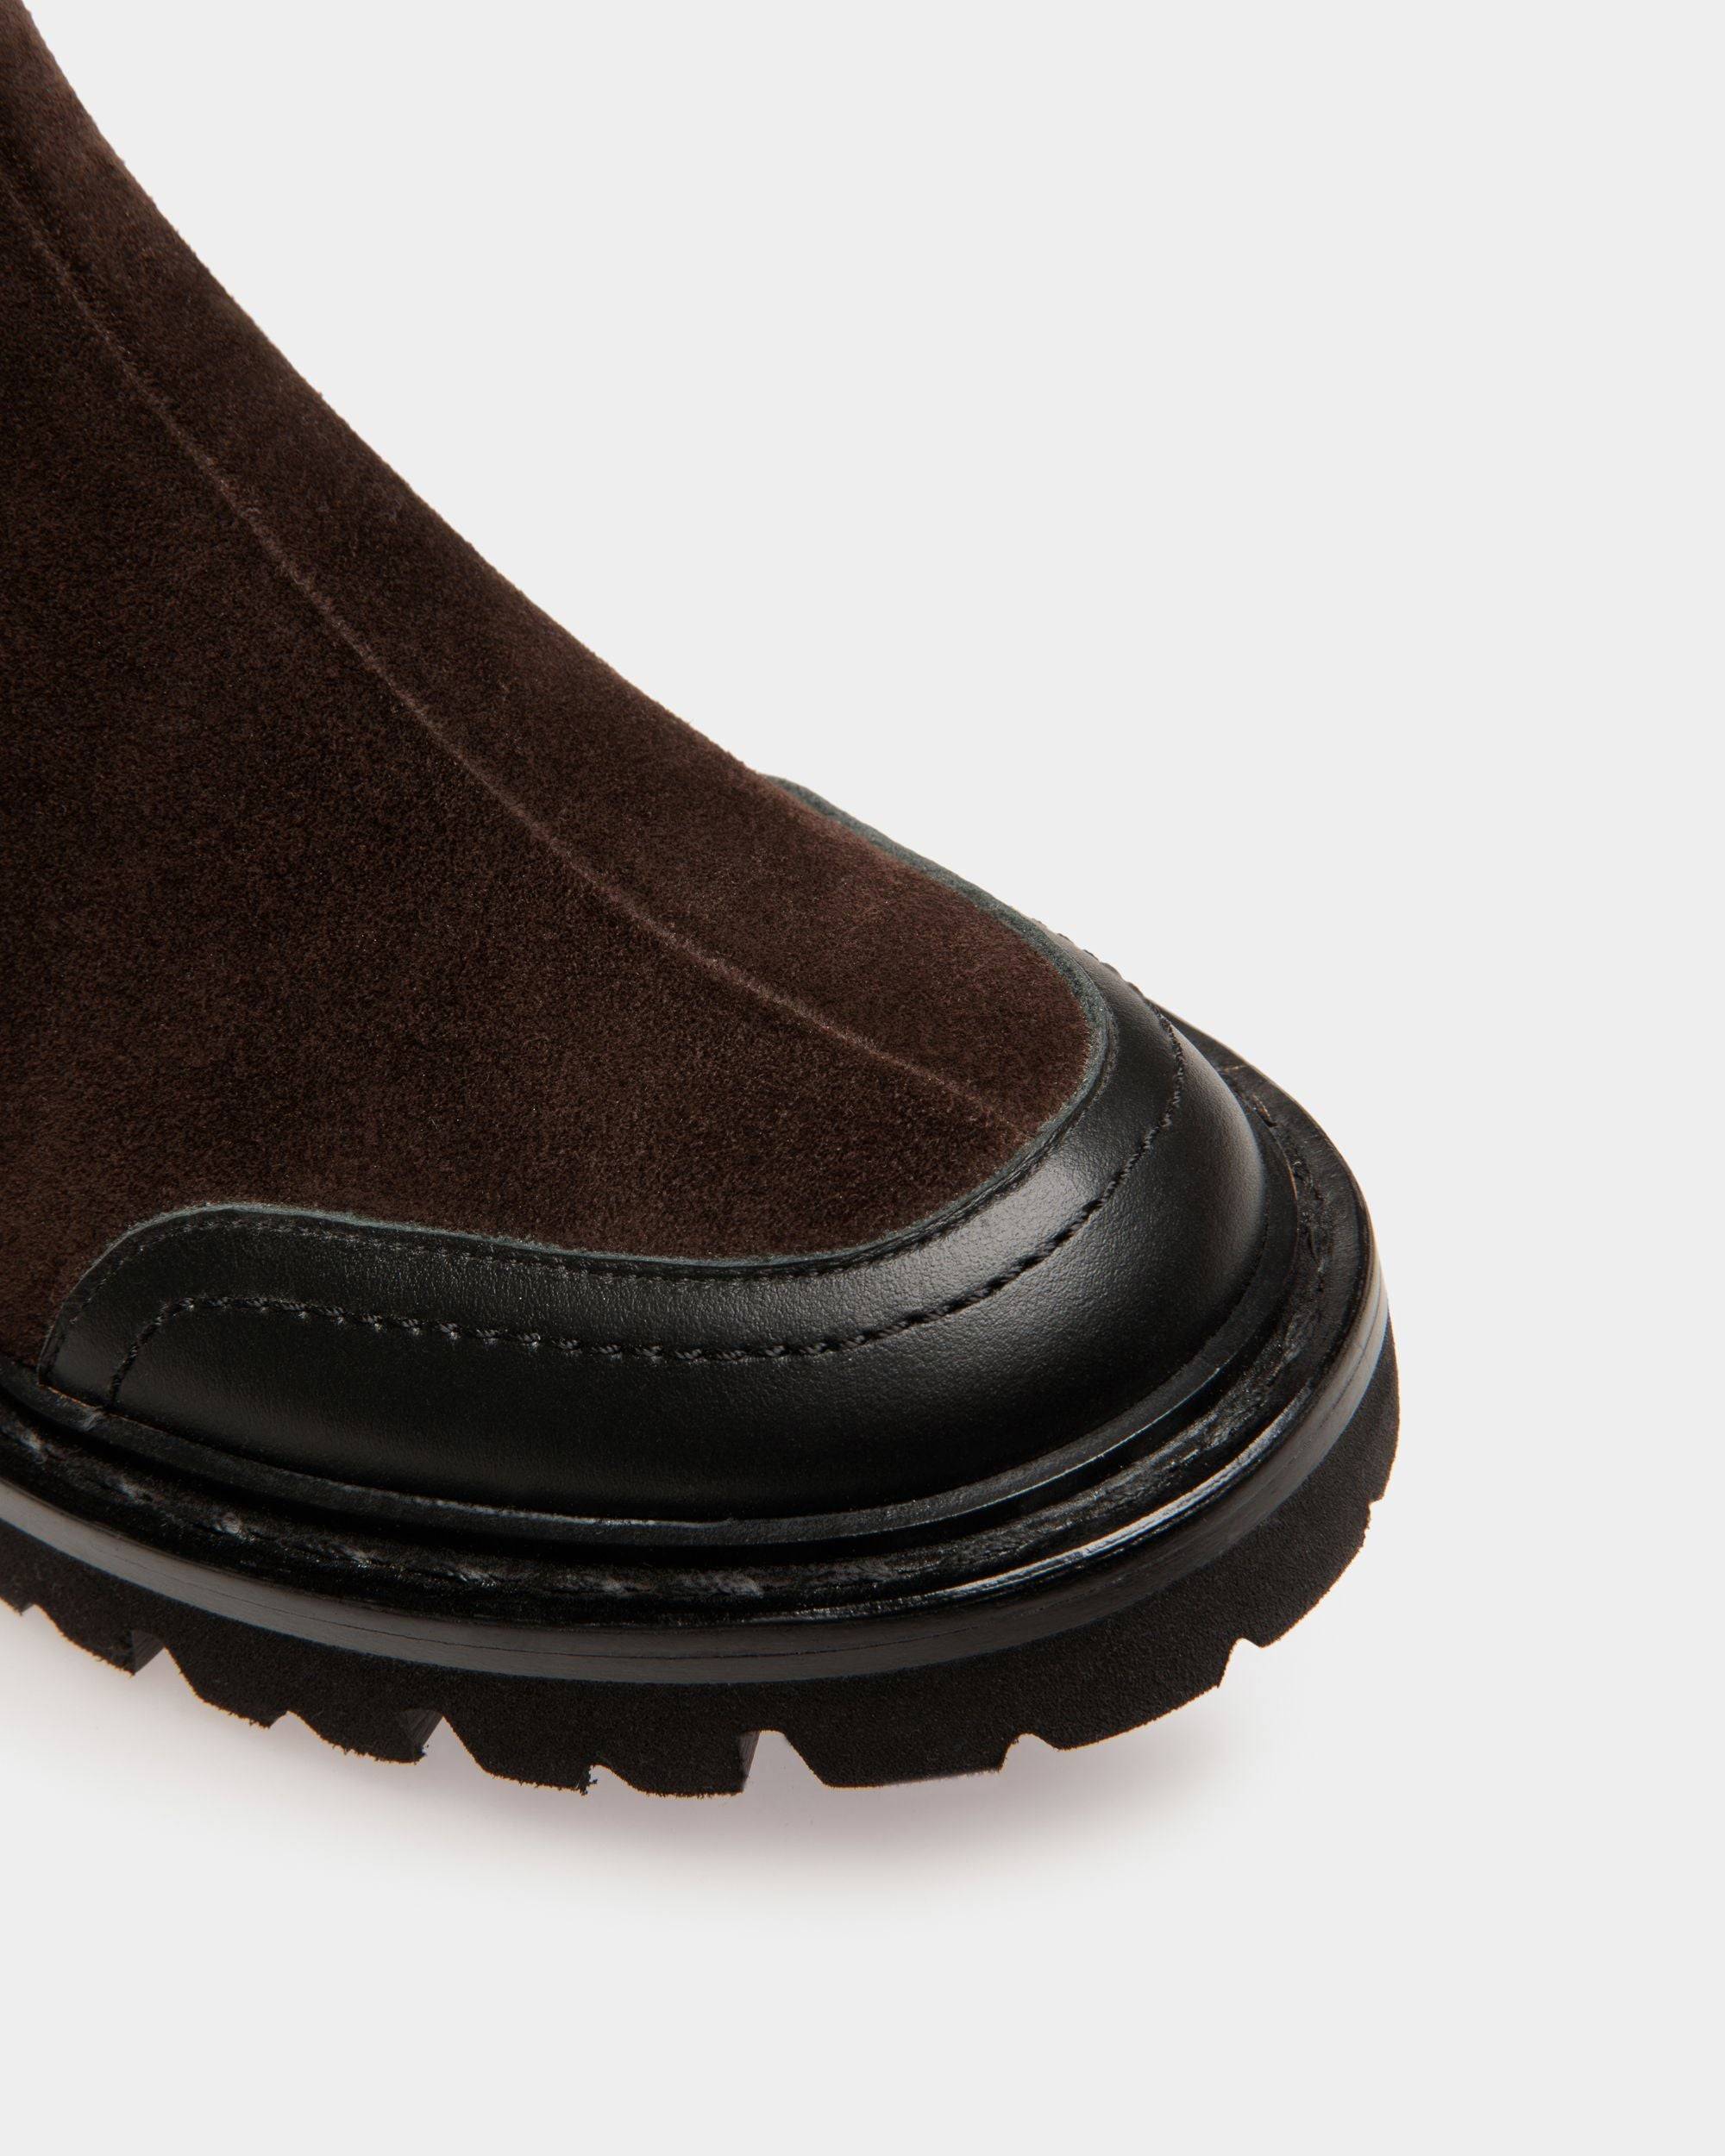 Nalyna | Women's Boots | Brown Leather | Bally | Still Life Detail